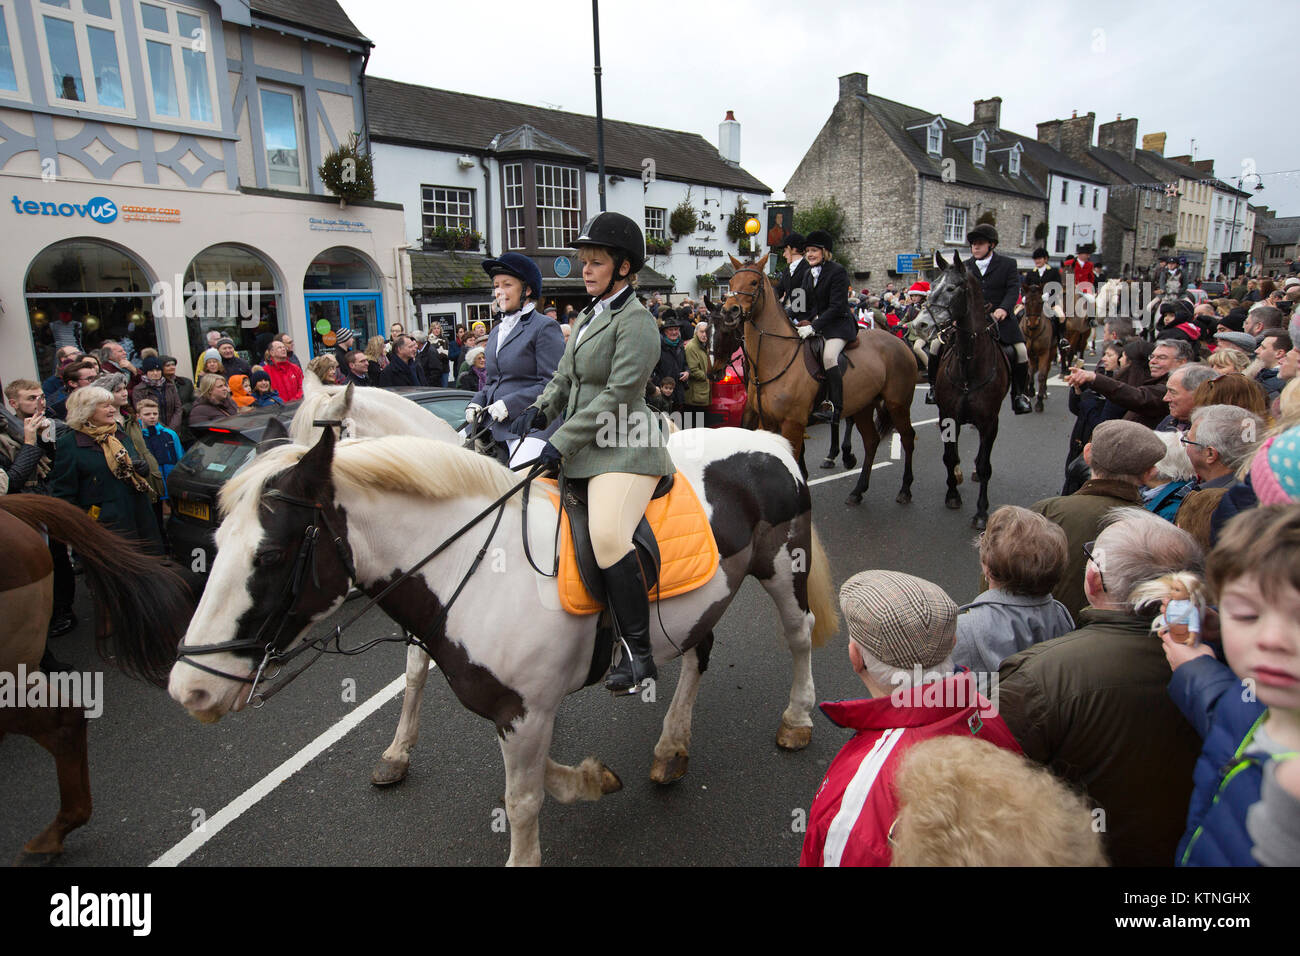 Cowbridge, Vale of Glamorgan, South Wales, United Kingdom 26th December 2017. Glamorgan Boxing Day Hunt parades through Cowbridge, Vale of Glamorgan, South Wales, United Kingdom 26th December 2017. Crowds of people lined the streets to watch the Glamorgan Boxing Day Hunt as it paraded through Cowbridge, Vale of Glamorgan. Credit: Jeff Gilbert/Alamy Live News Stock Photo